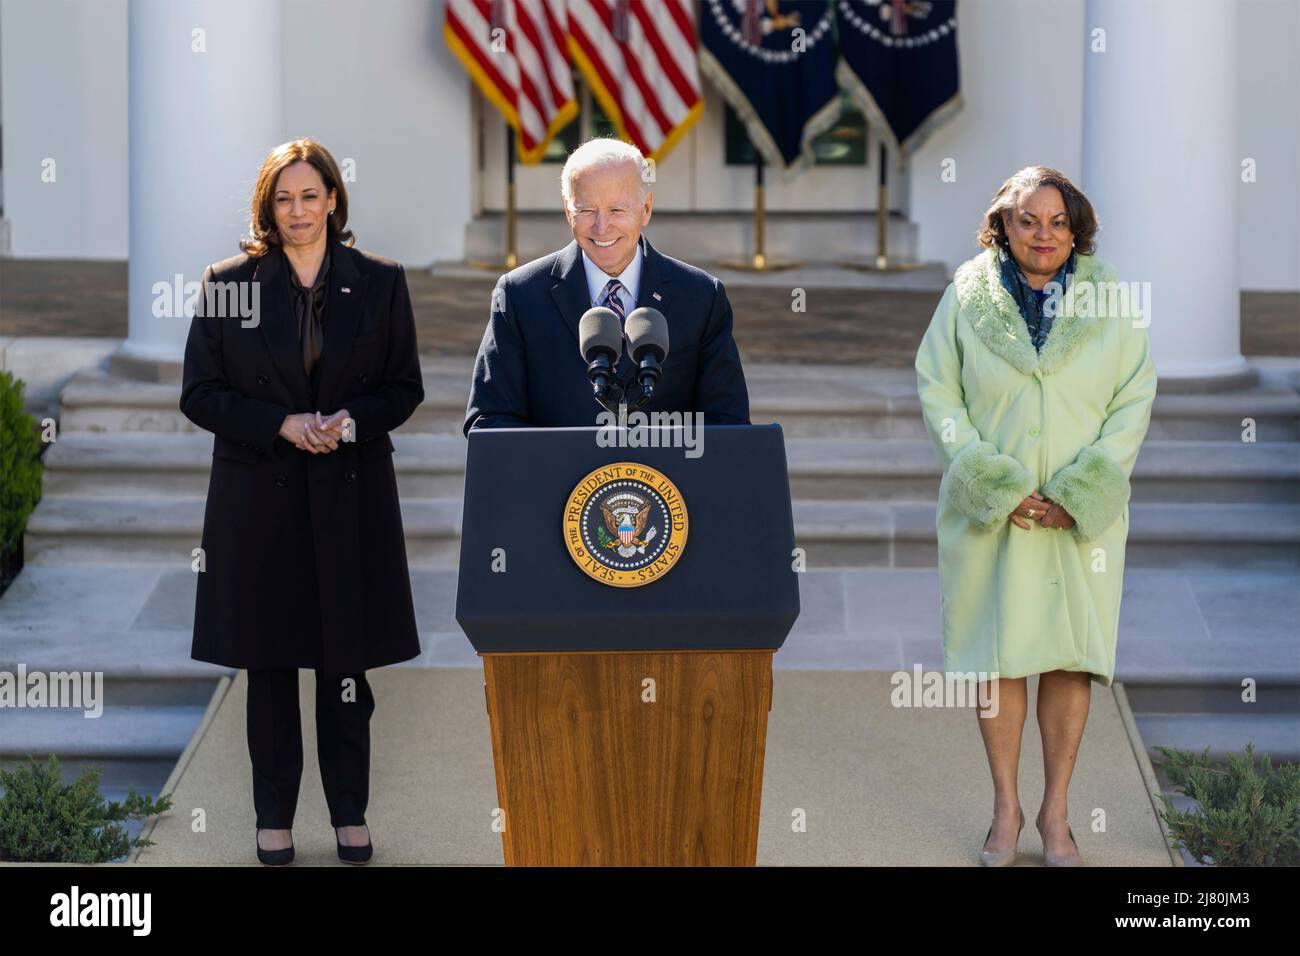 U.S President Joe Biden, delivers remarks as Michelle Duster, great granddaughter of NAACP co-founder Ida B. Wells, right, and Vice President Kamala Harris, right, look on during the signing ceremony for H.R. 55, the Emmett Till Anti-lynching Act, in the Rose Garden of the White House, March 29, 2022 in Washington, D.C. Stock Photo